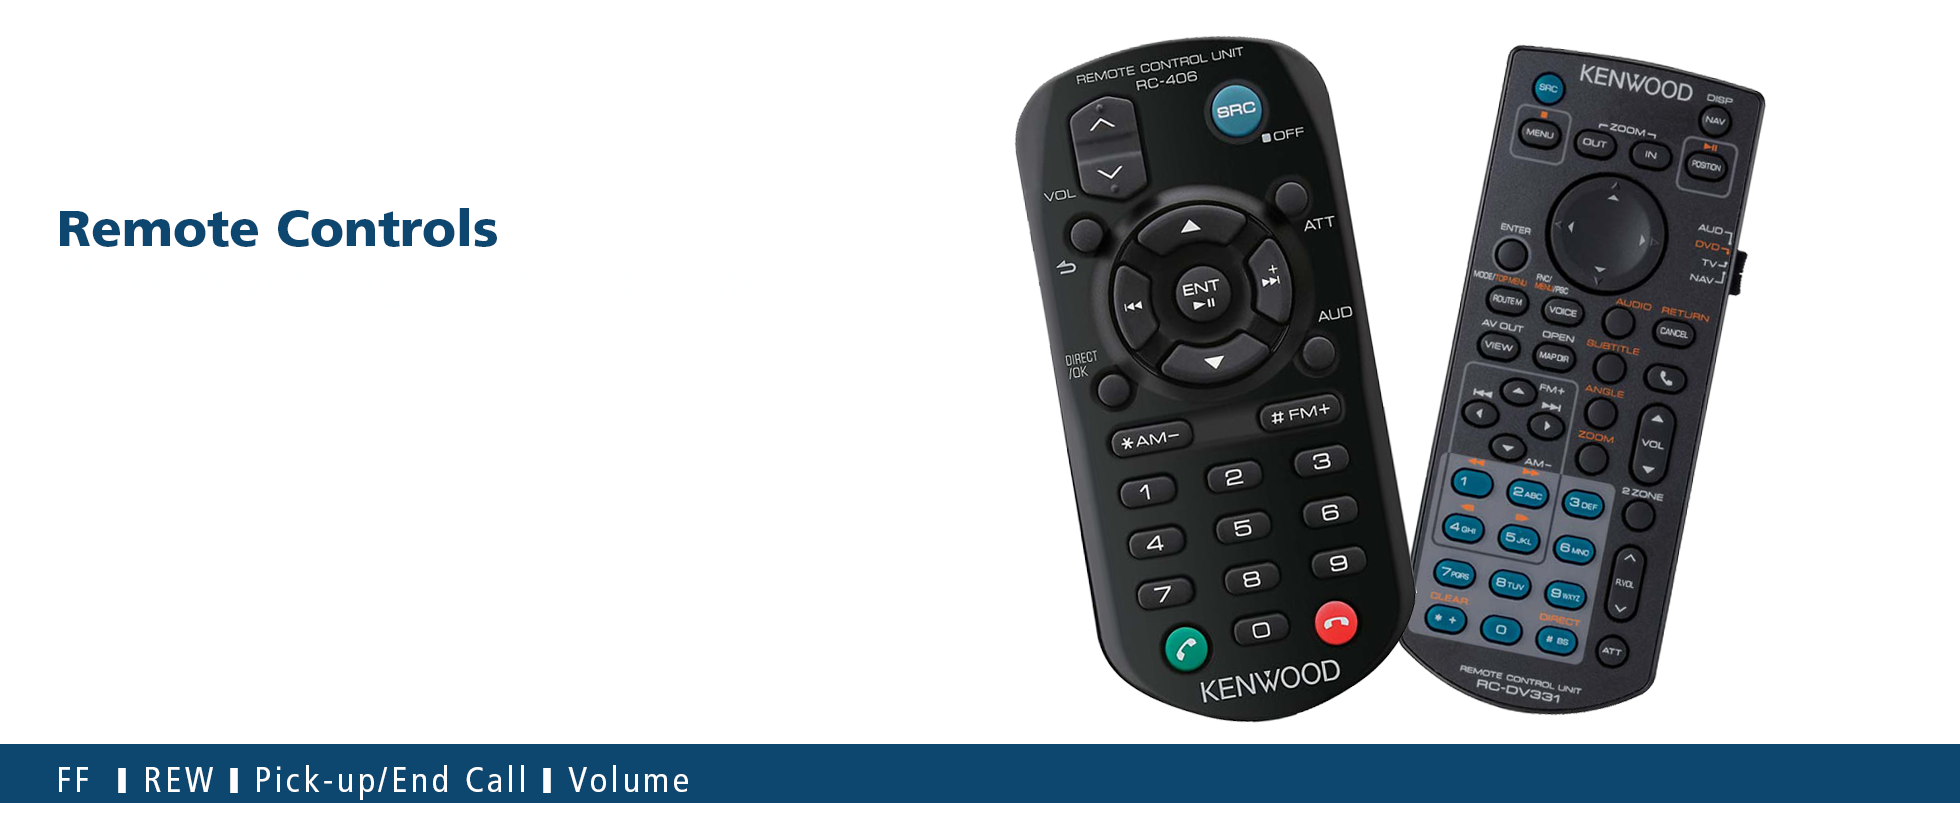 Remote Controls • KCA-RC405 Features • KENWOOD UK